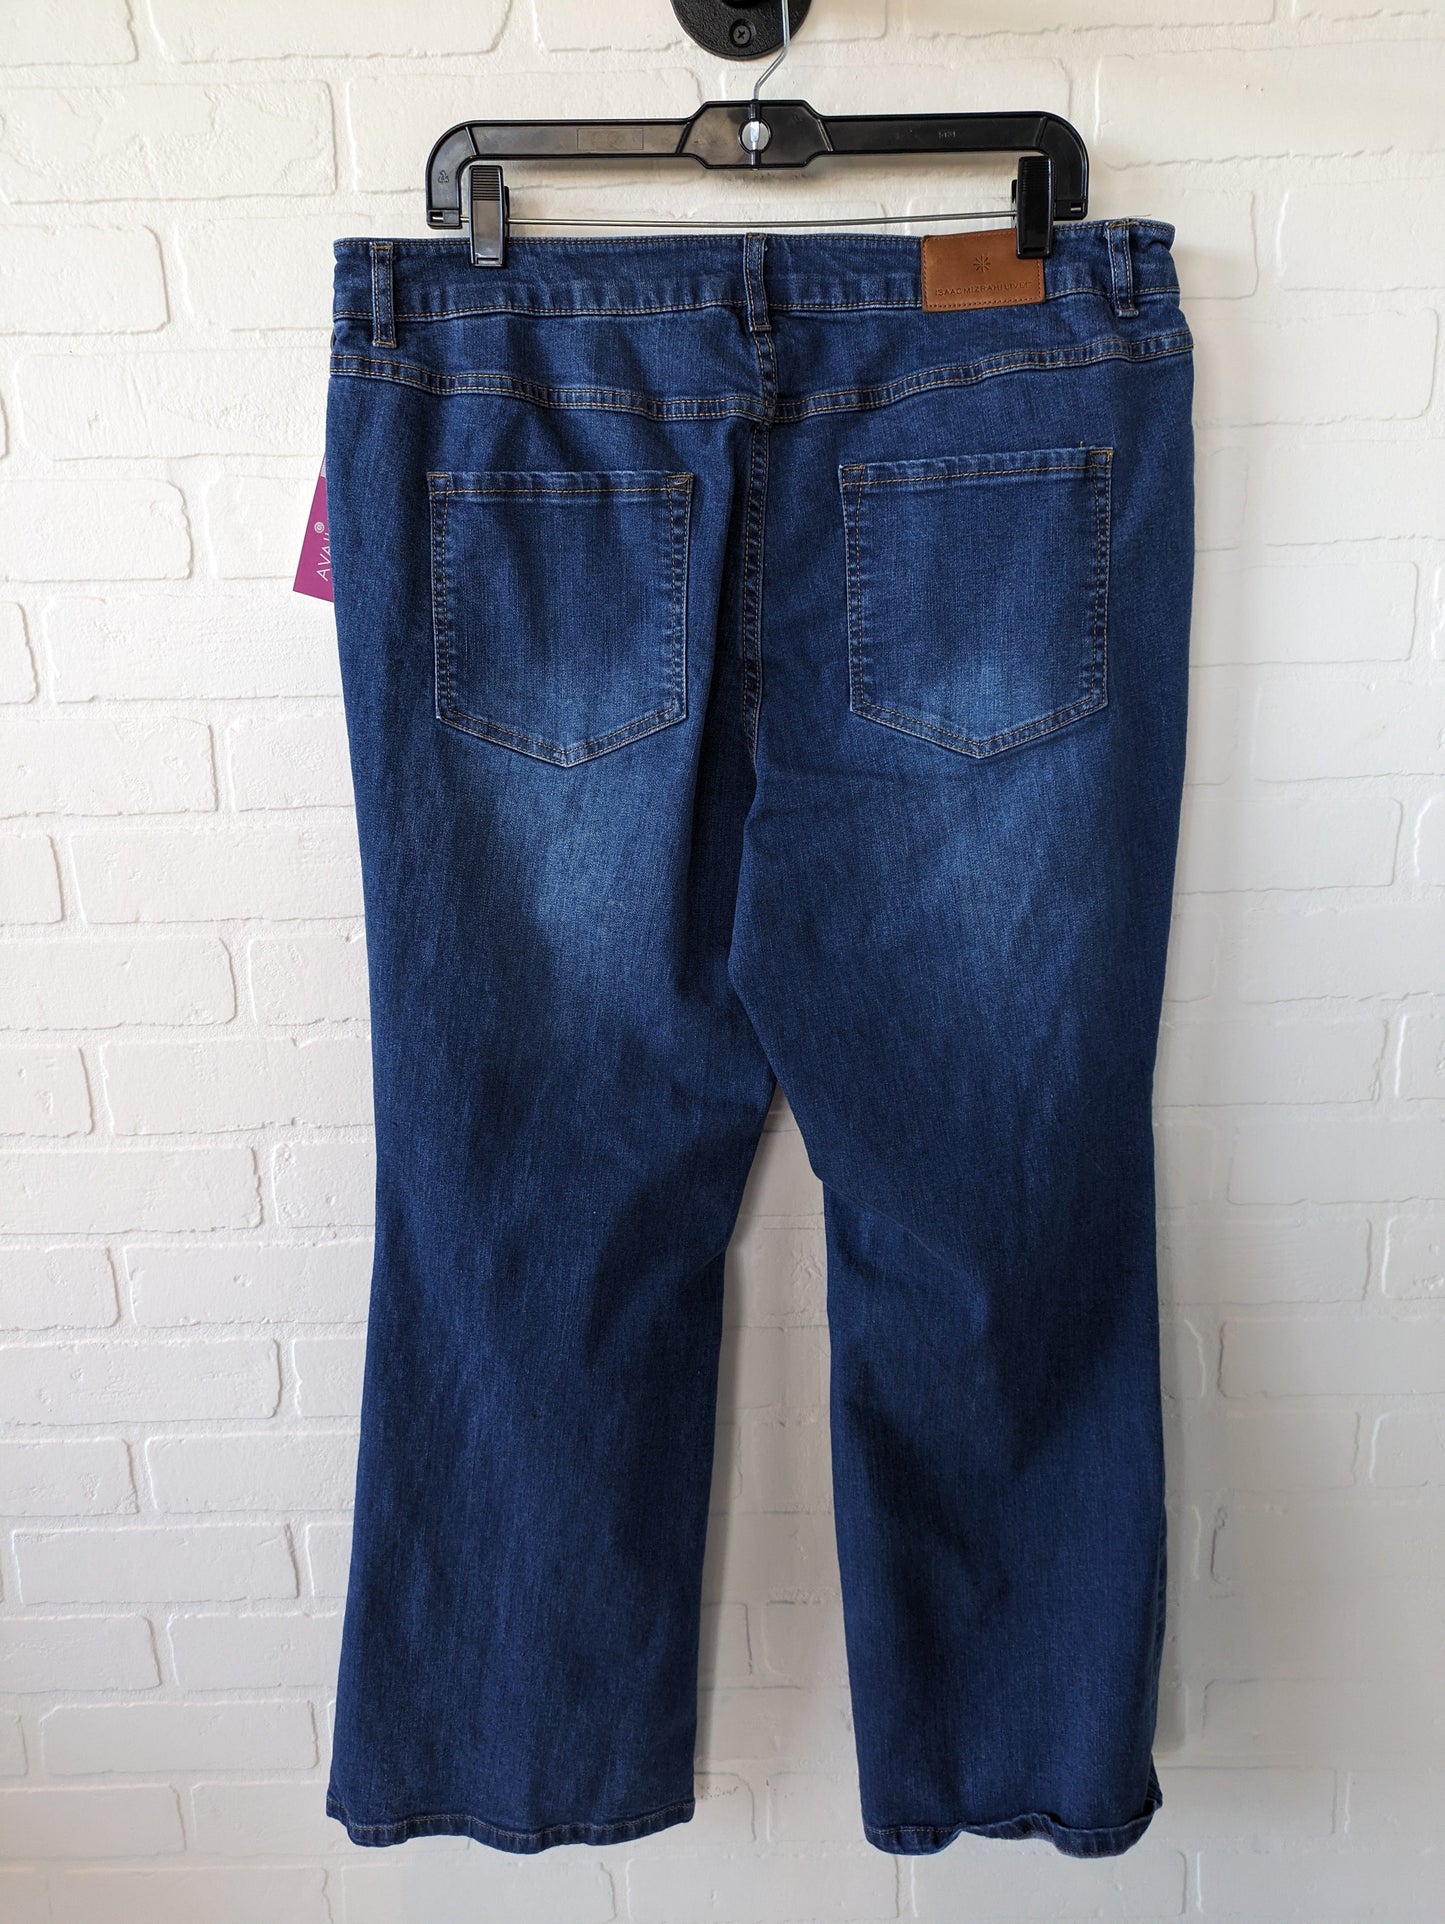 Jeans Straight By Isaac Mizrahi  Size: 18